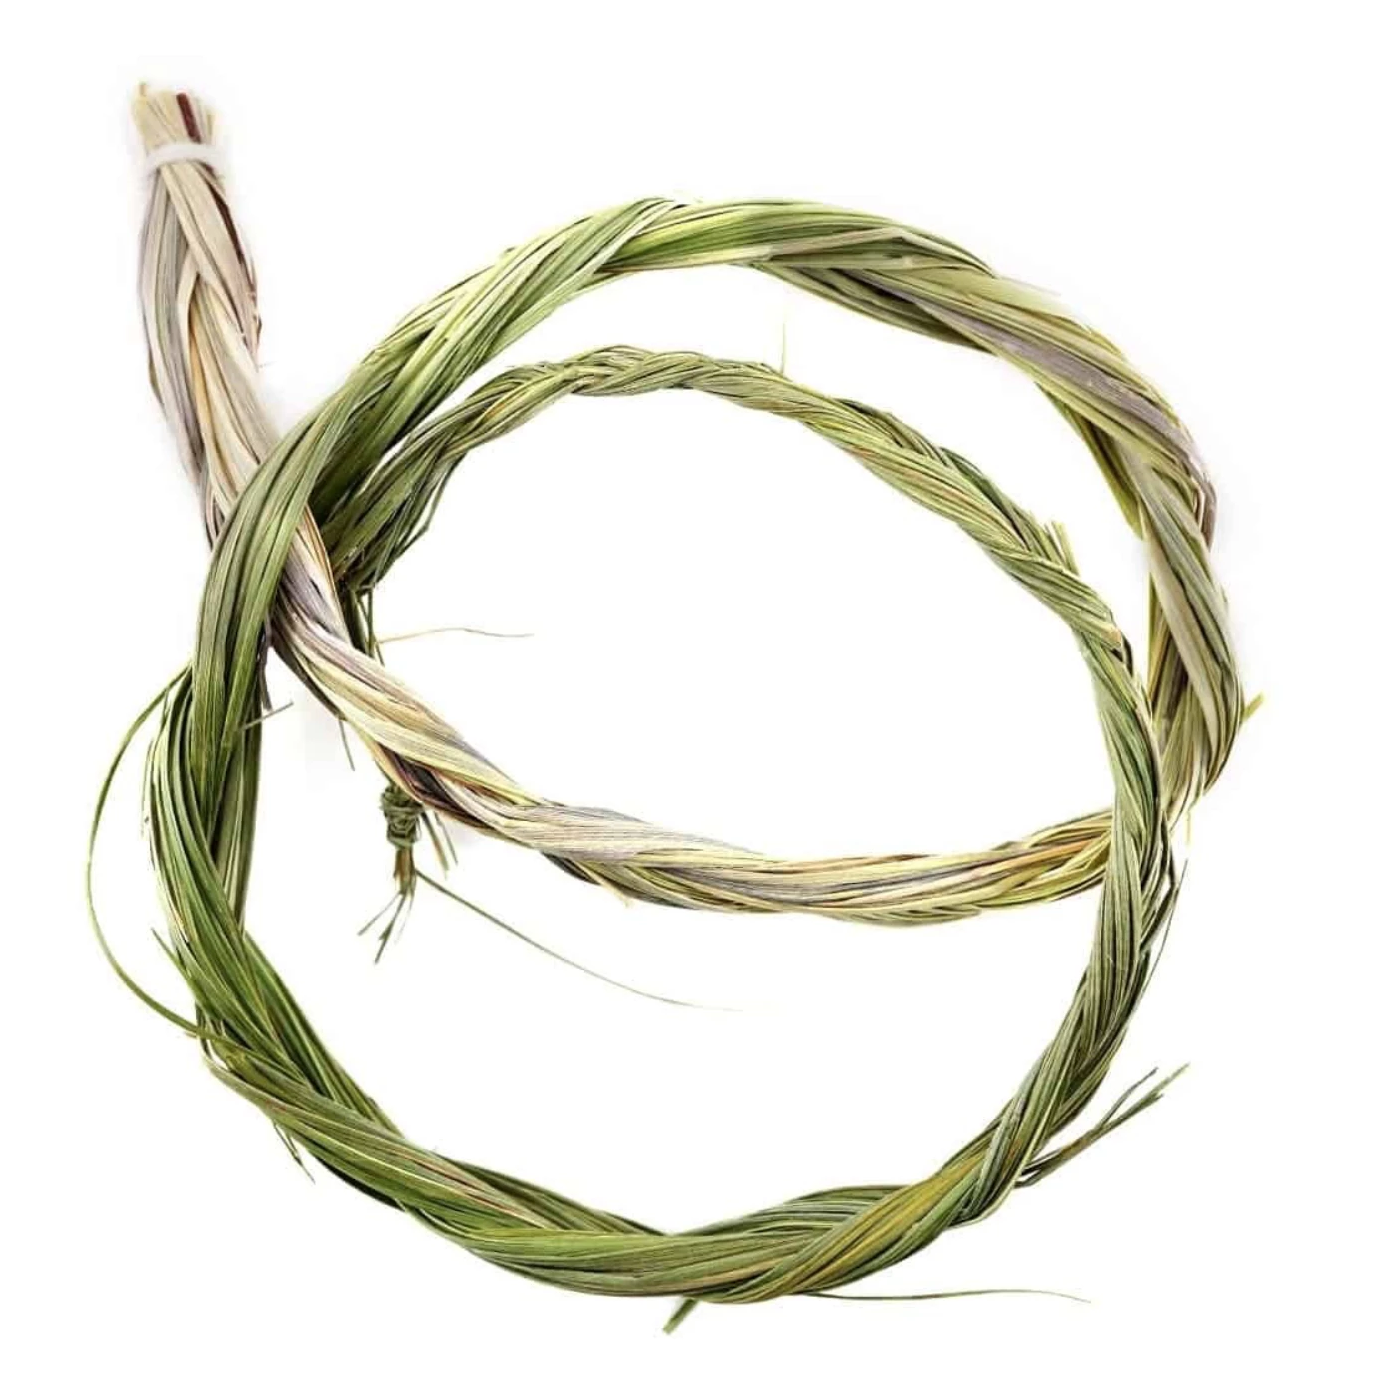 Sweetgrass Braid - Red Lake Nation Foods